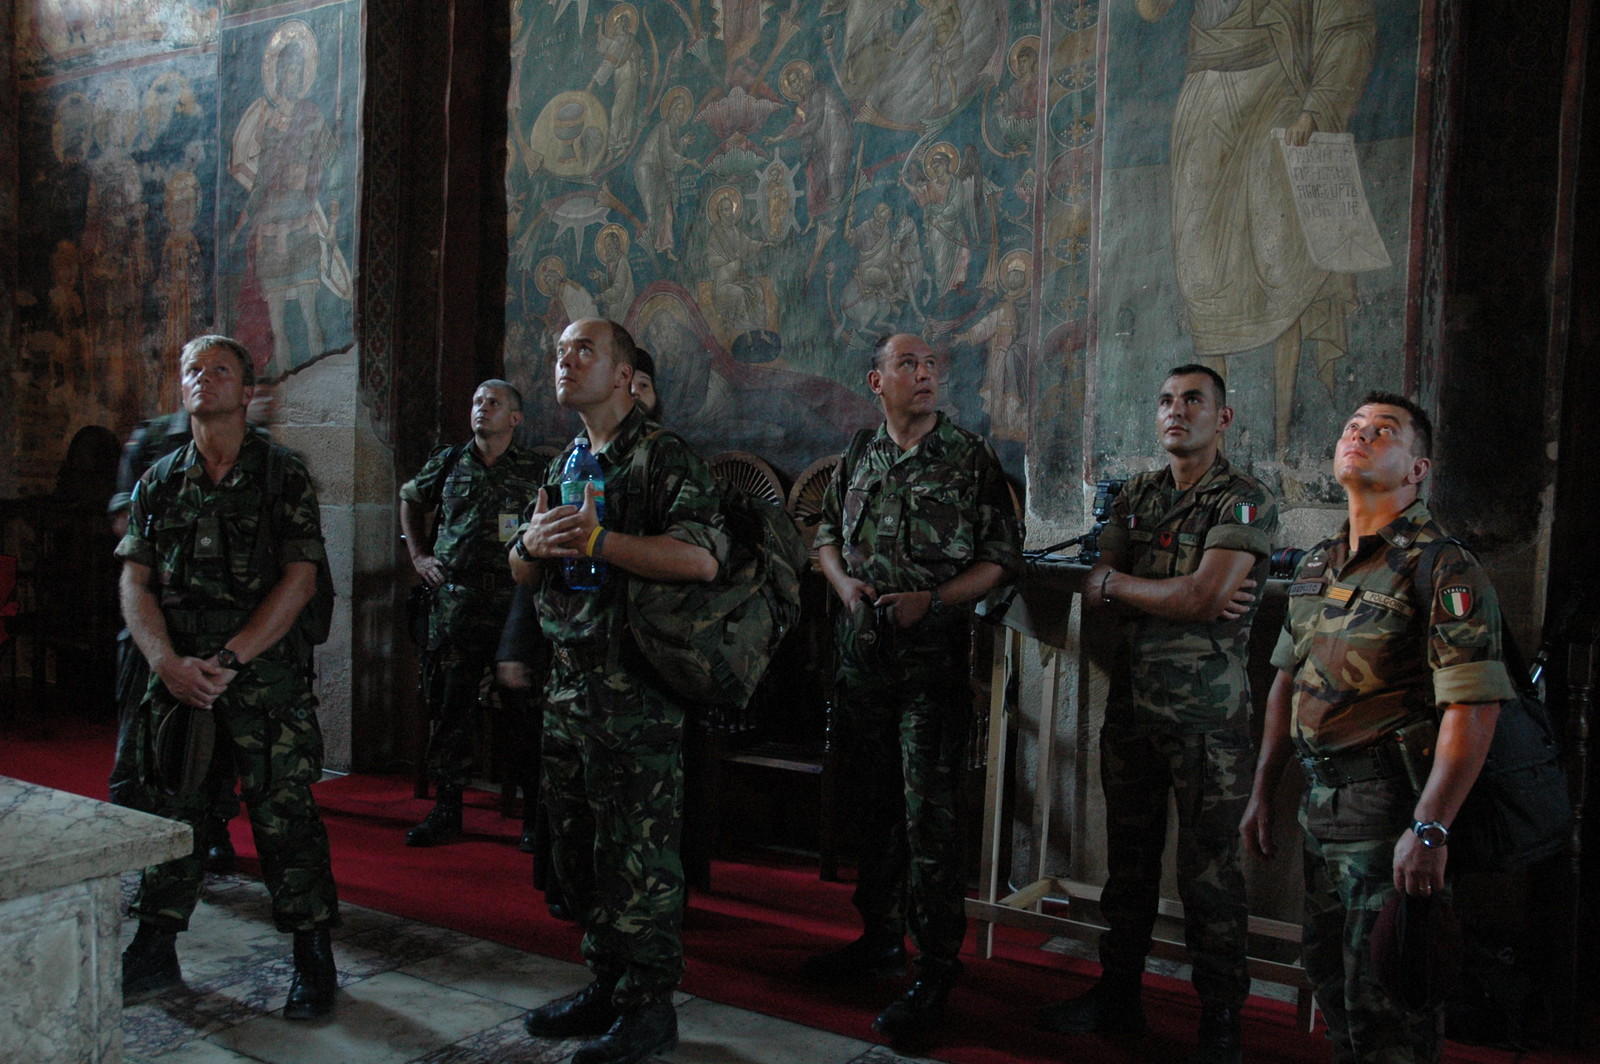 KFOR Soldiers visiting the Monastery 8